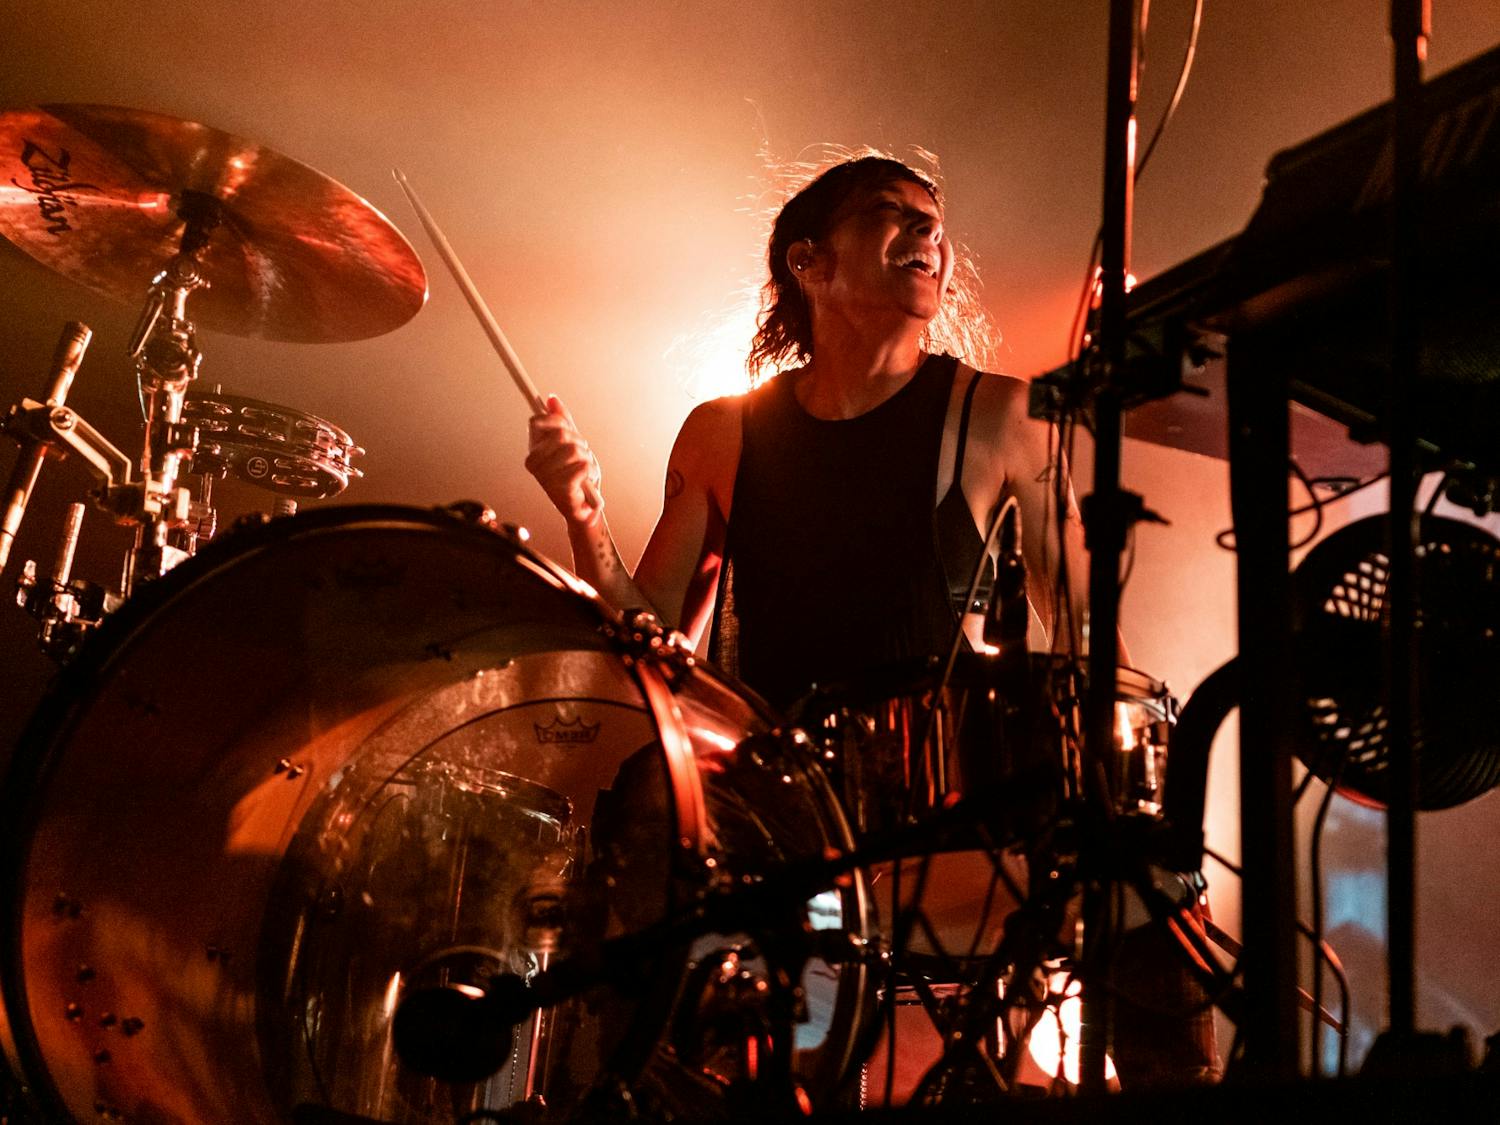 Kim Schifino plays drums during her band’s show in Columbia. This show was part of the “Grand 10-Year Celebration Tour.”